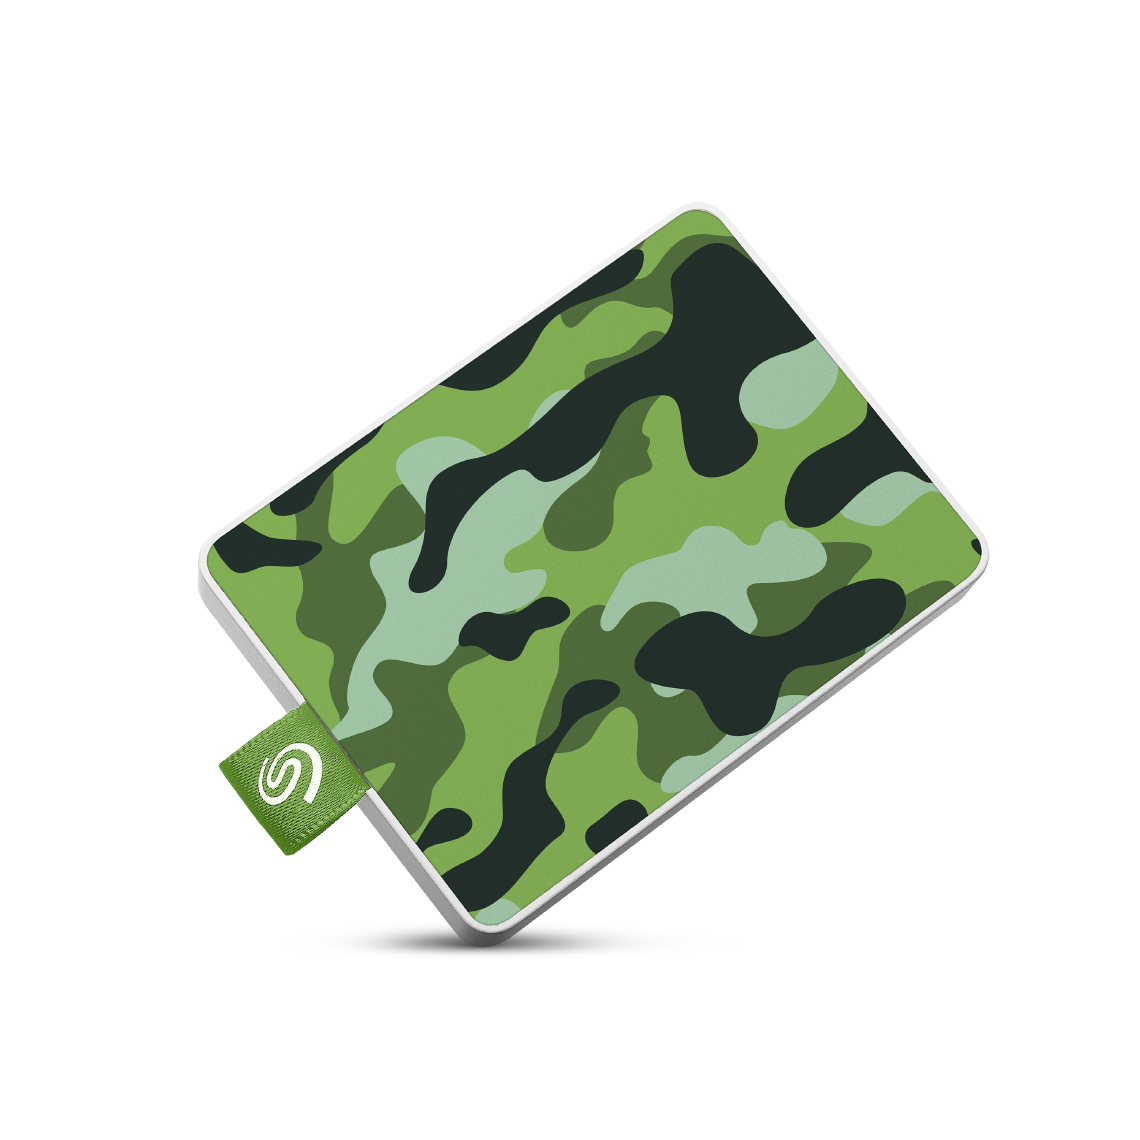 Seagate - One Touch SSD 500Go Grn One Touch SSD 500Go Camo-Green RTL - SSD Interne